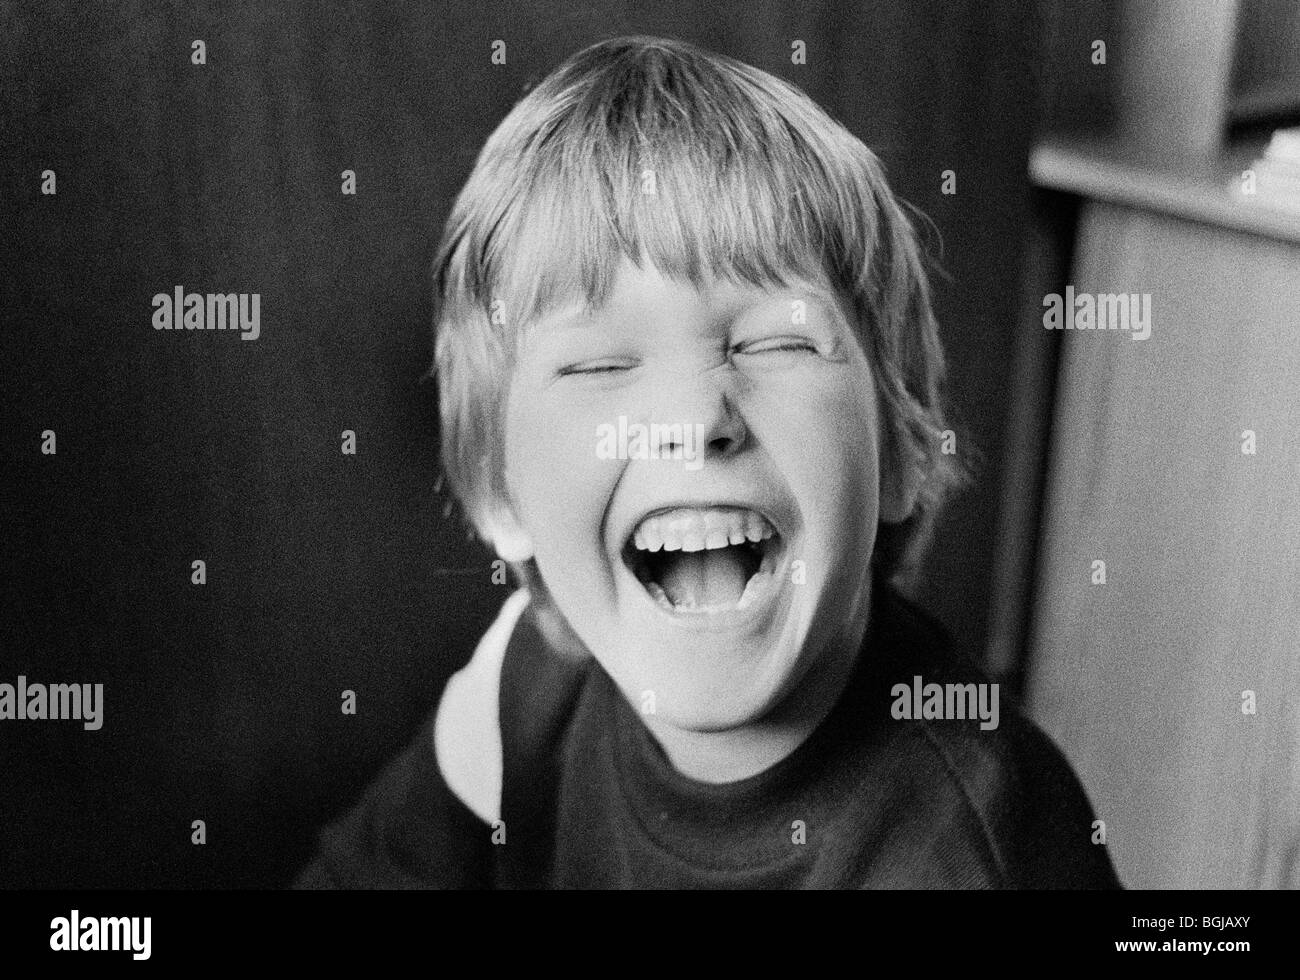 Laughing boy, Sweden. Stock Photo